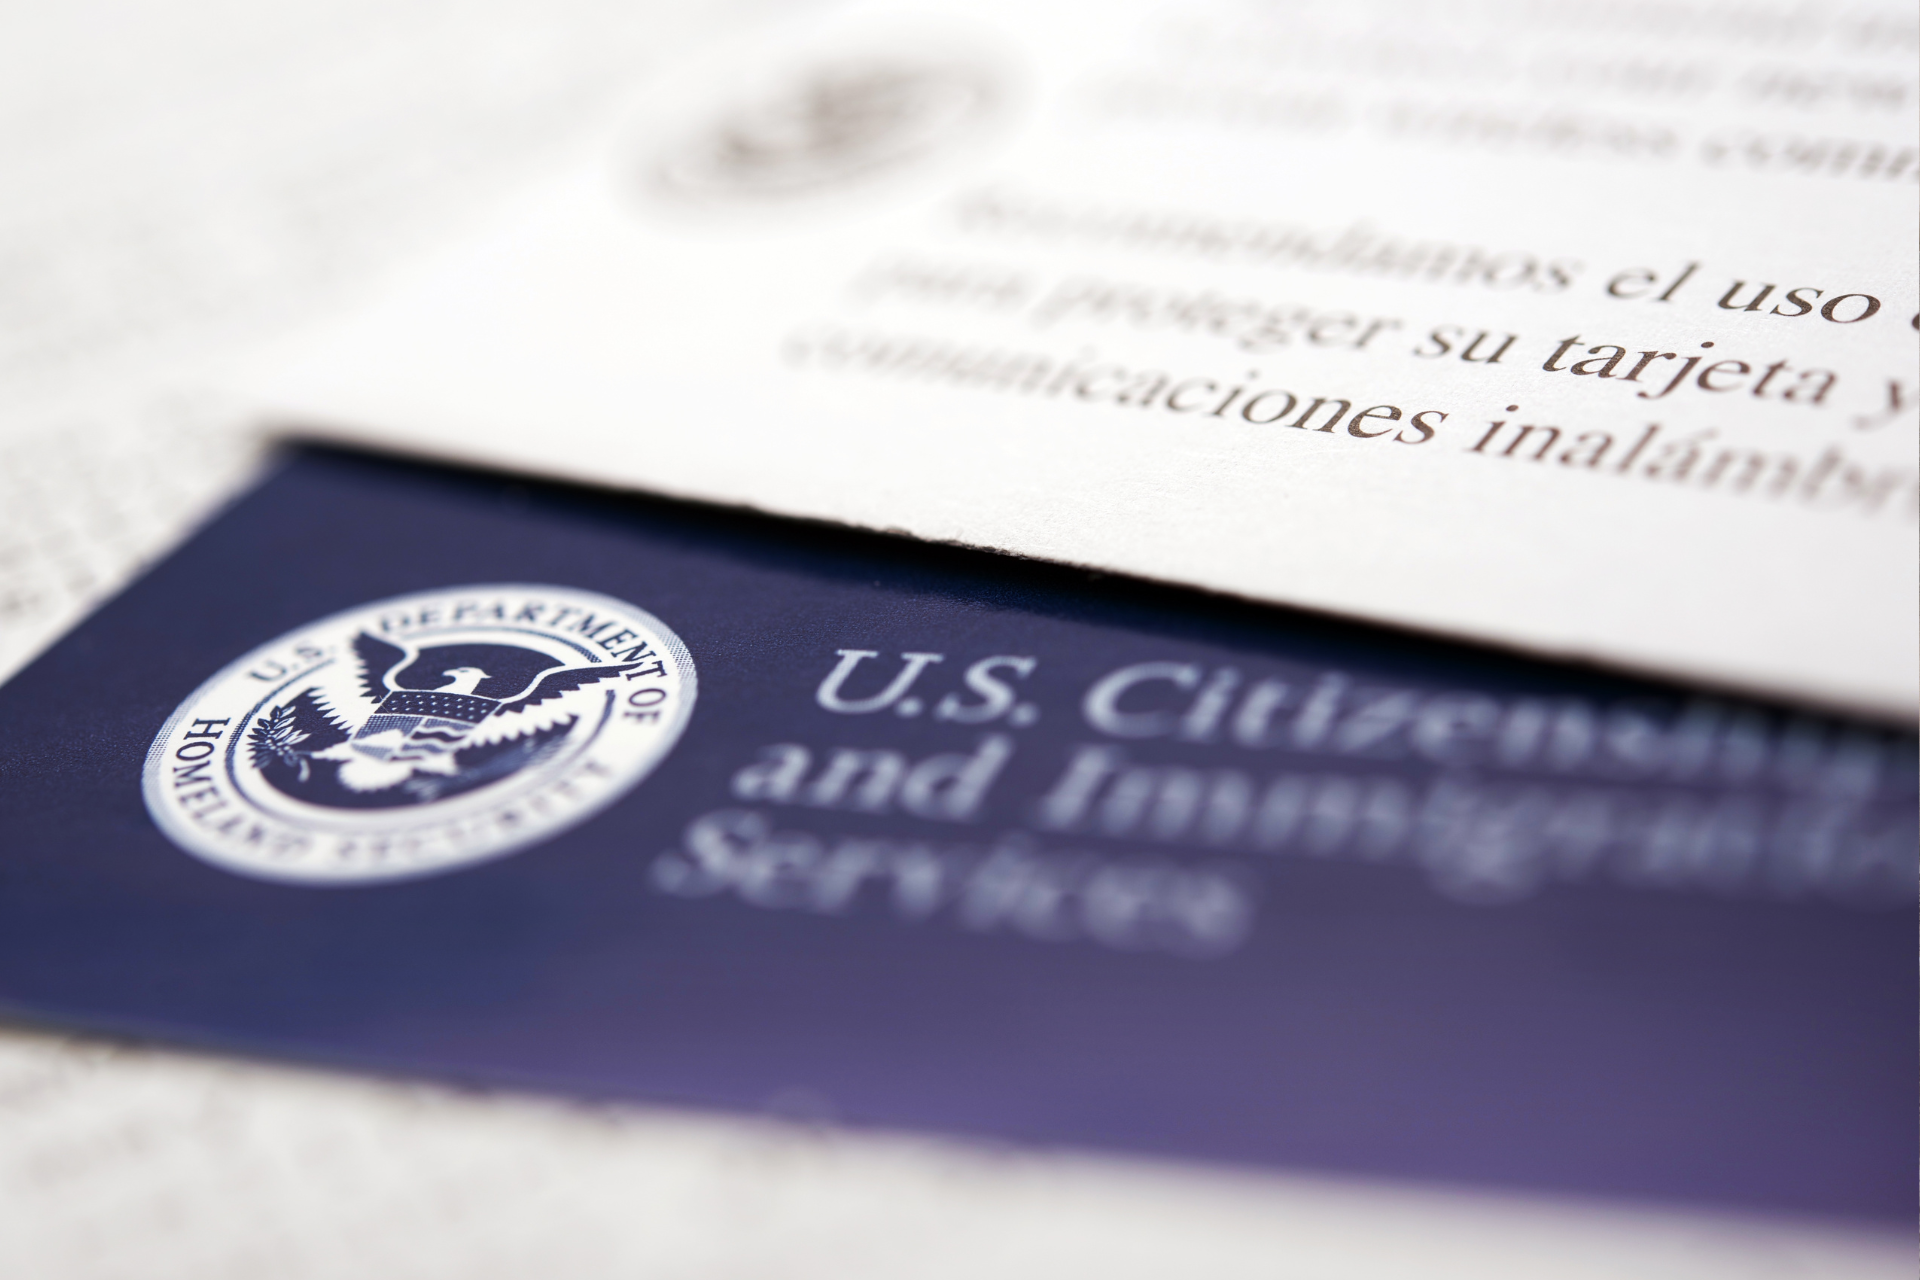 Mark Your Calendars: USCIS Says No Grace Period for Updated Forms Taking Effect April 1